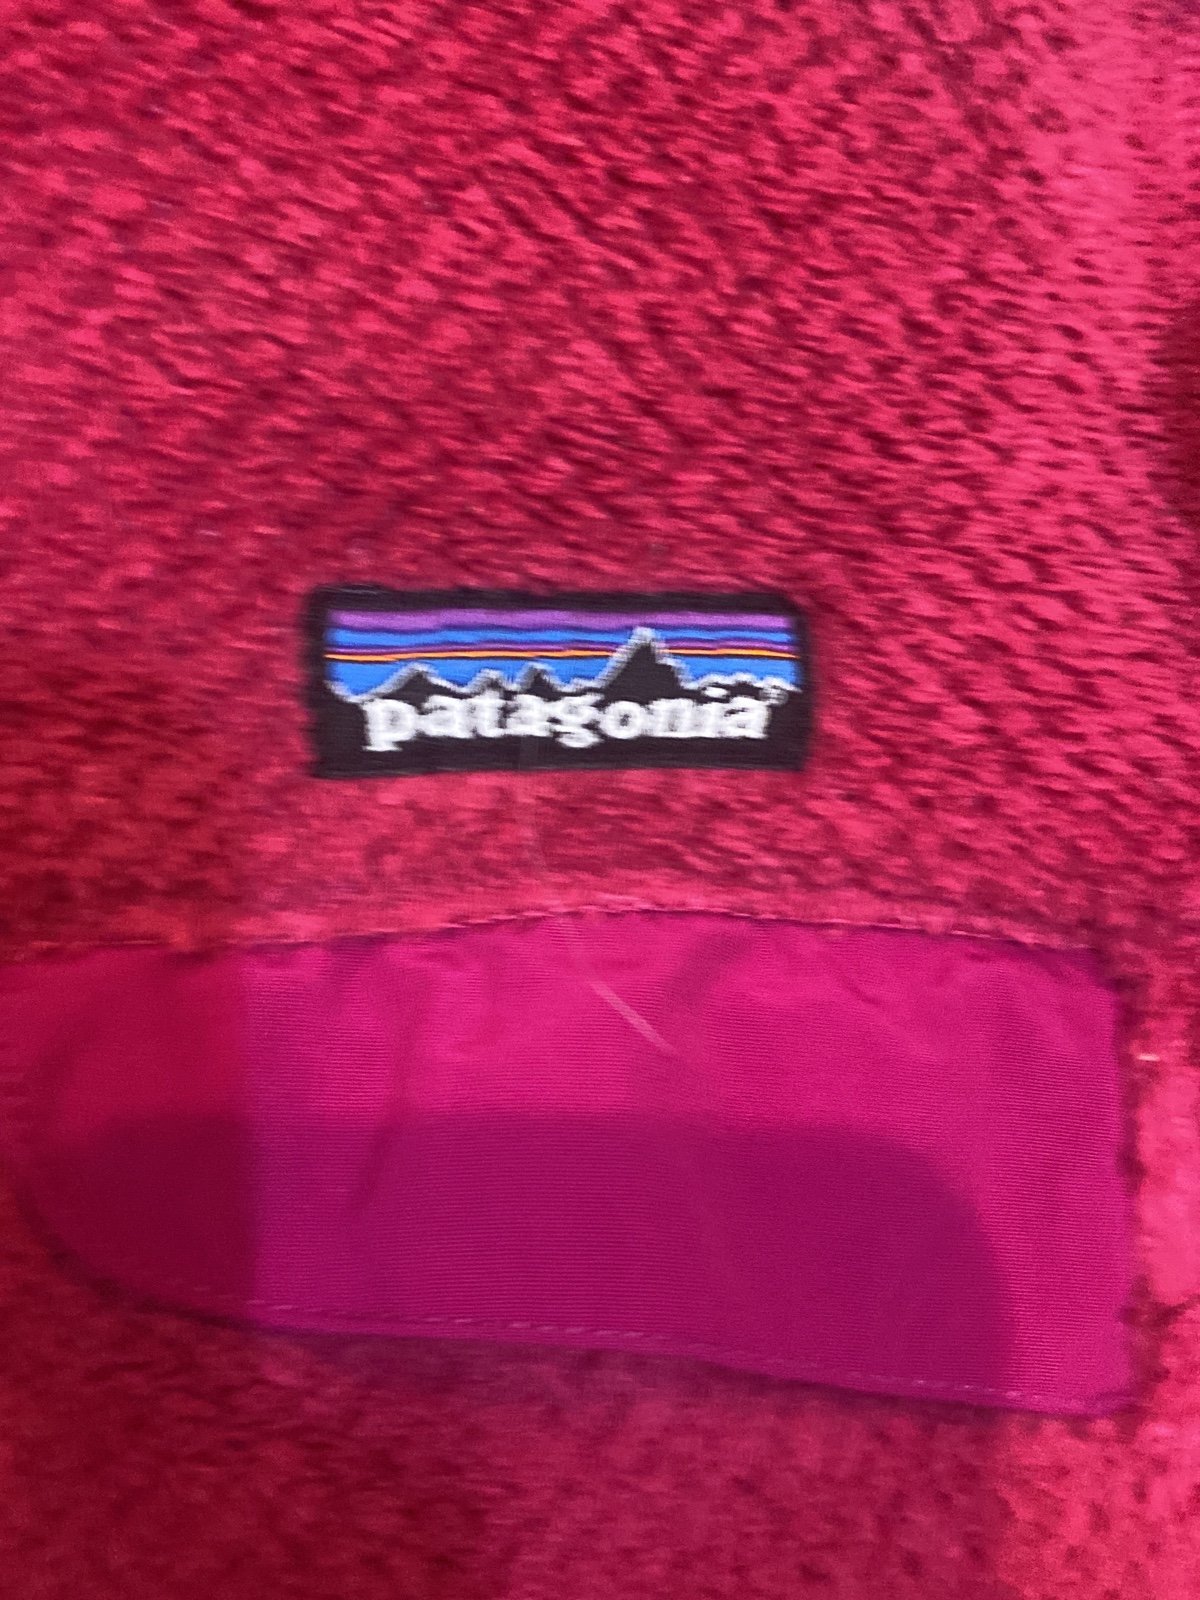 Wholesale price Patagonia fleece size small  excellent condition ghHIXiaHq on sale